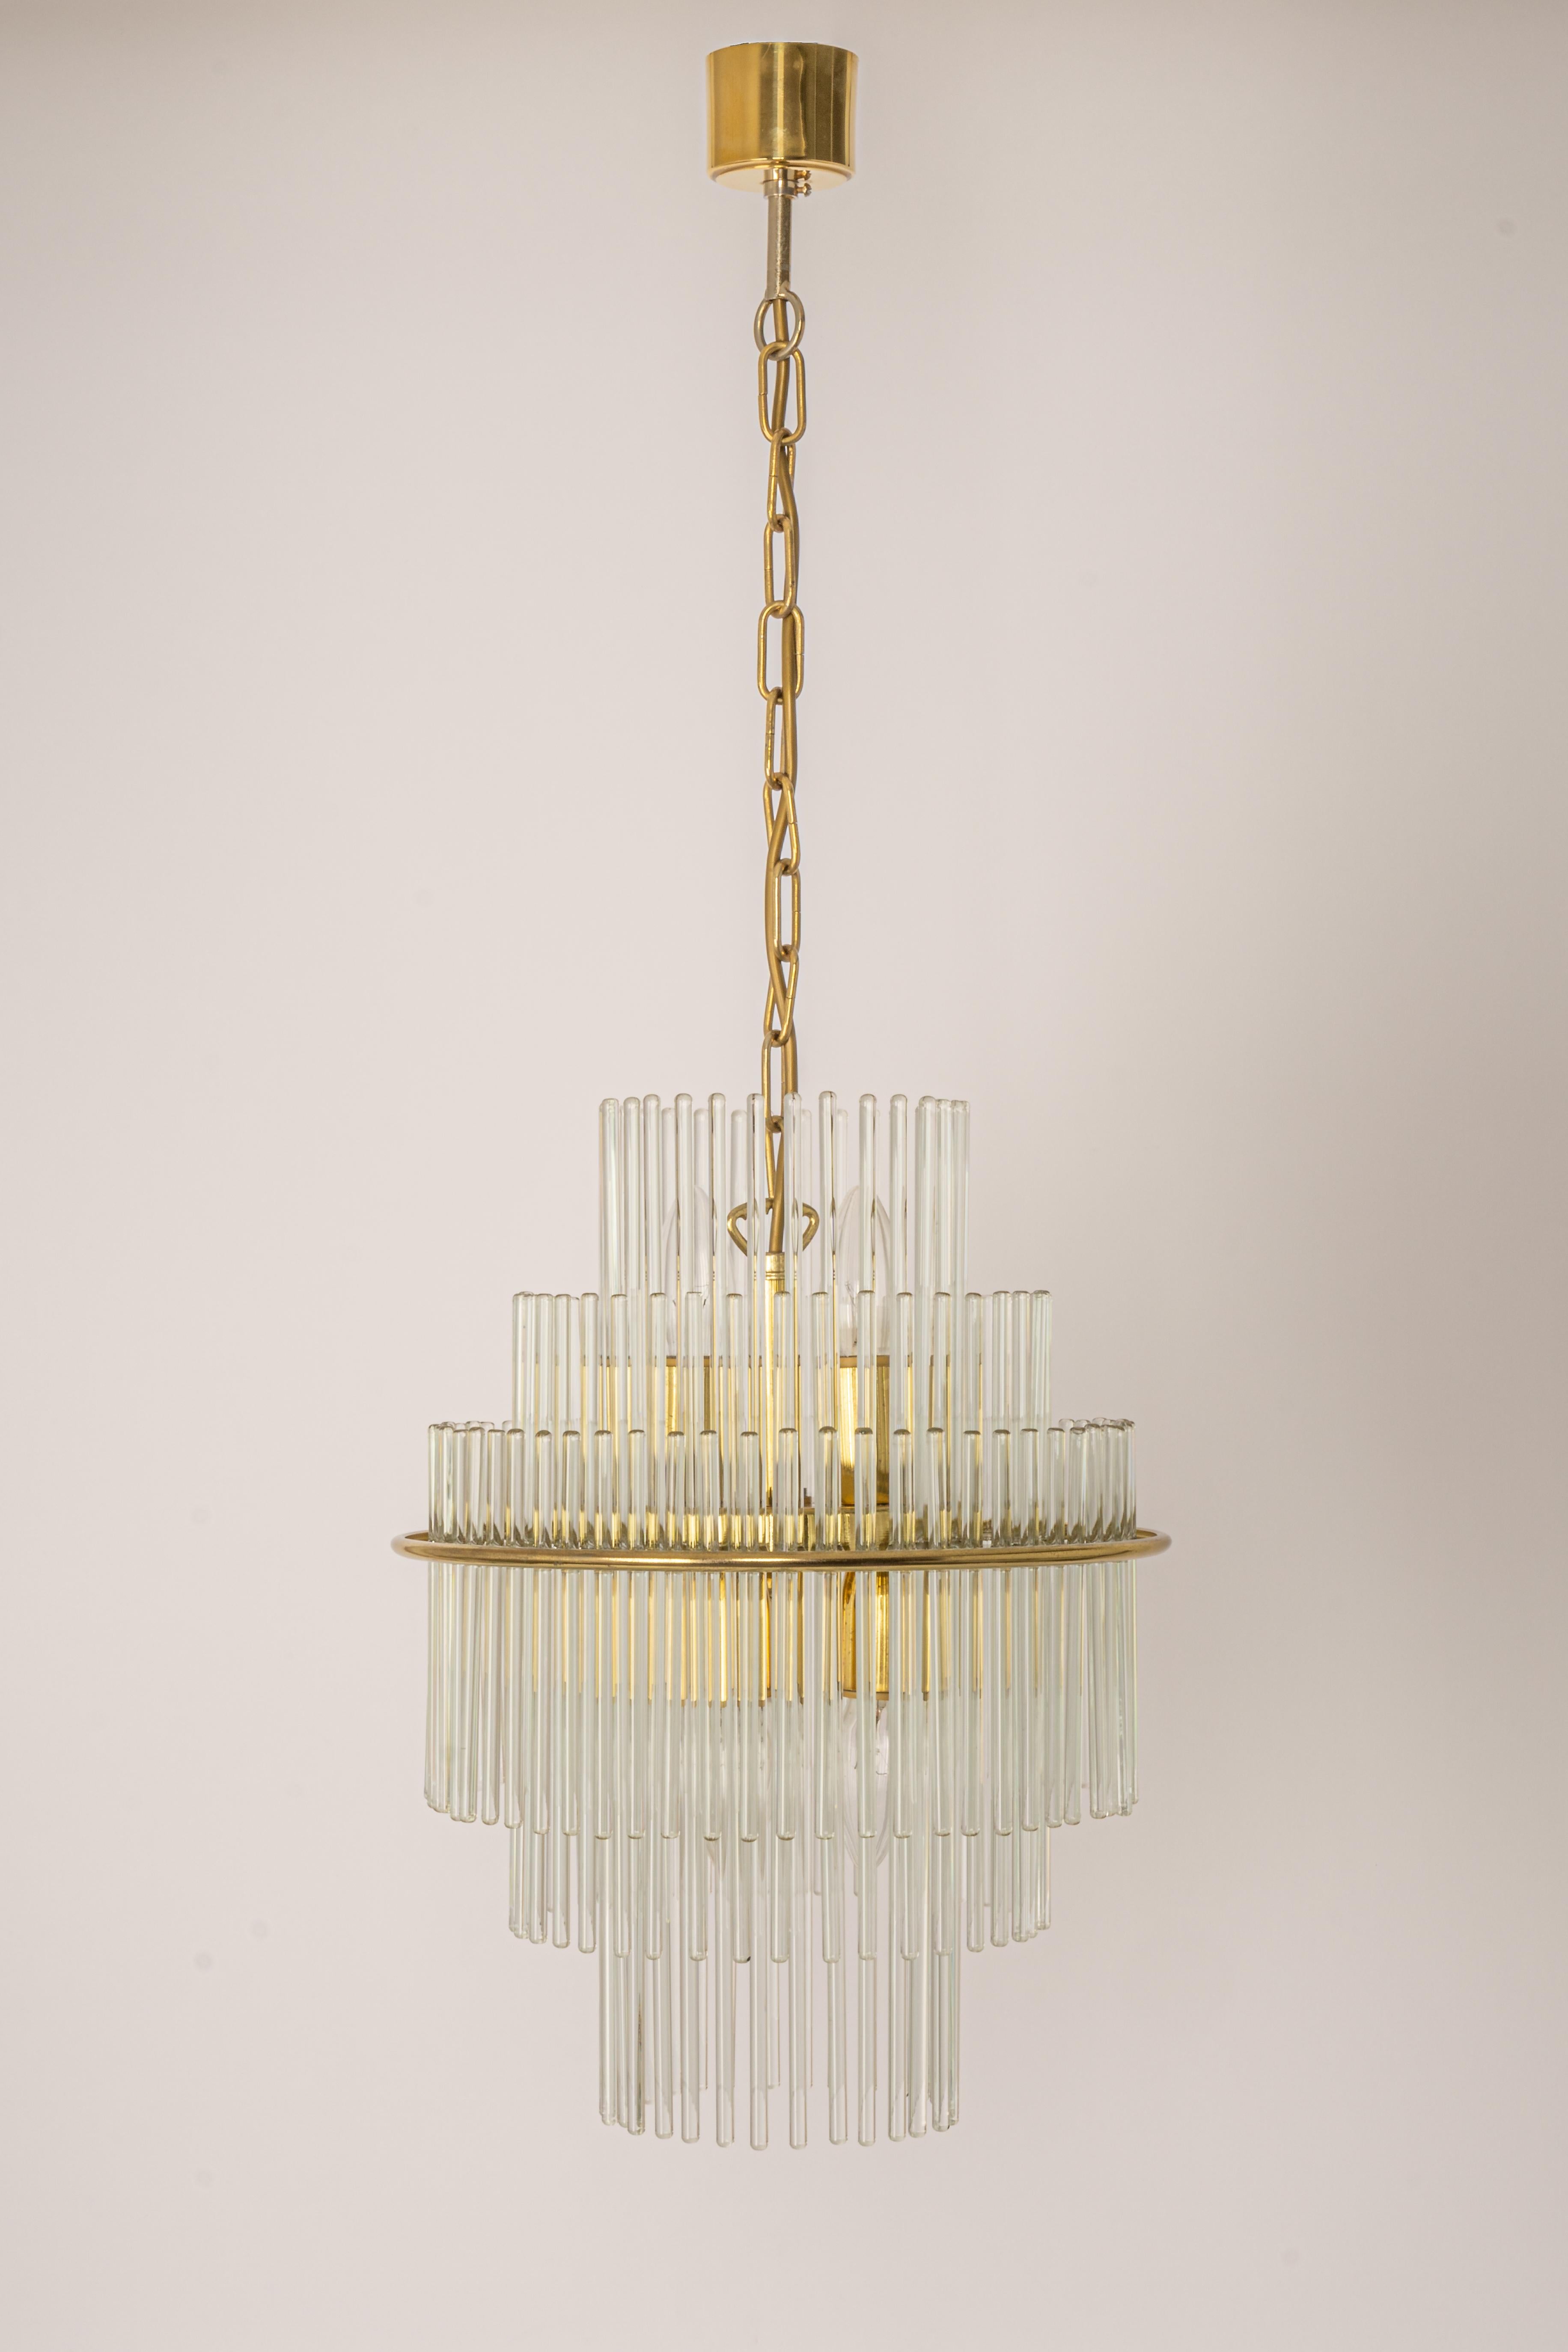 1 of 2 Petite crystal glass rod pendant light, Germany, 1970s. 
Wonderful light effect.
Sockets: It needs 5 x E14 small bulbs ( max. 40 Watts each)
Light bulbs are not included. It is possible to install this fixture in all countries (US, UK,